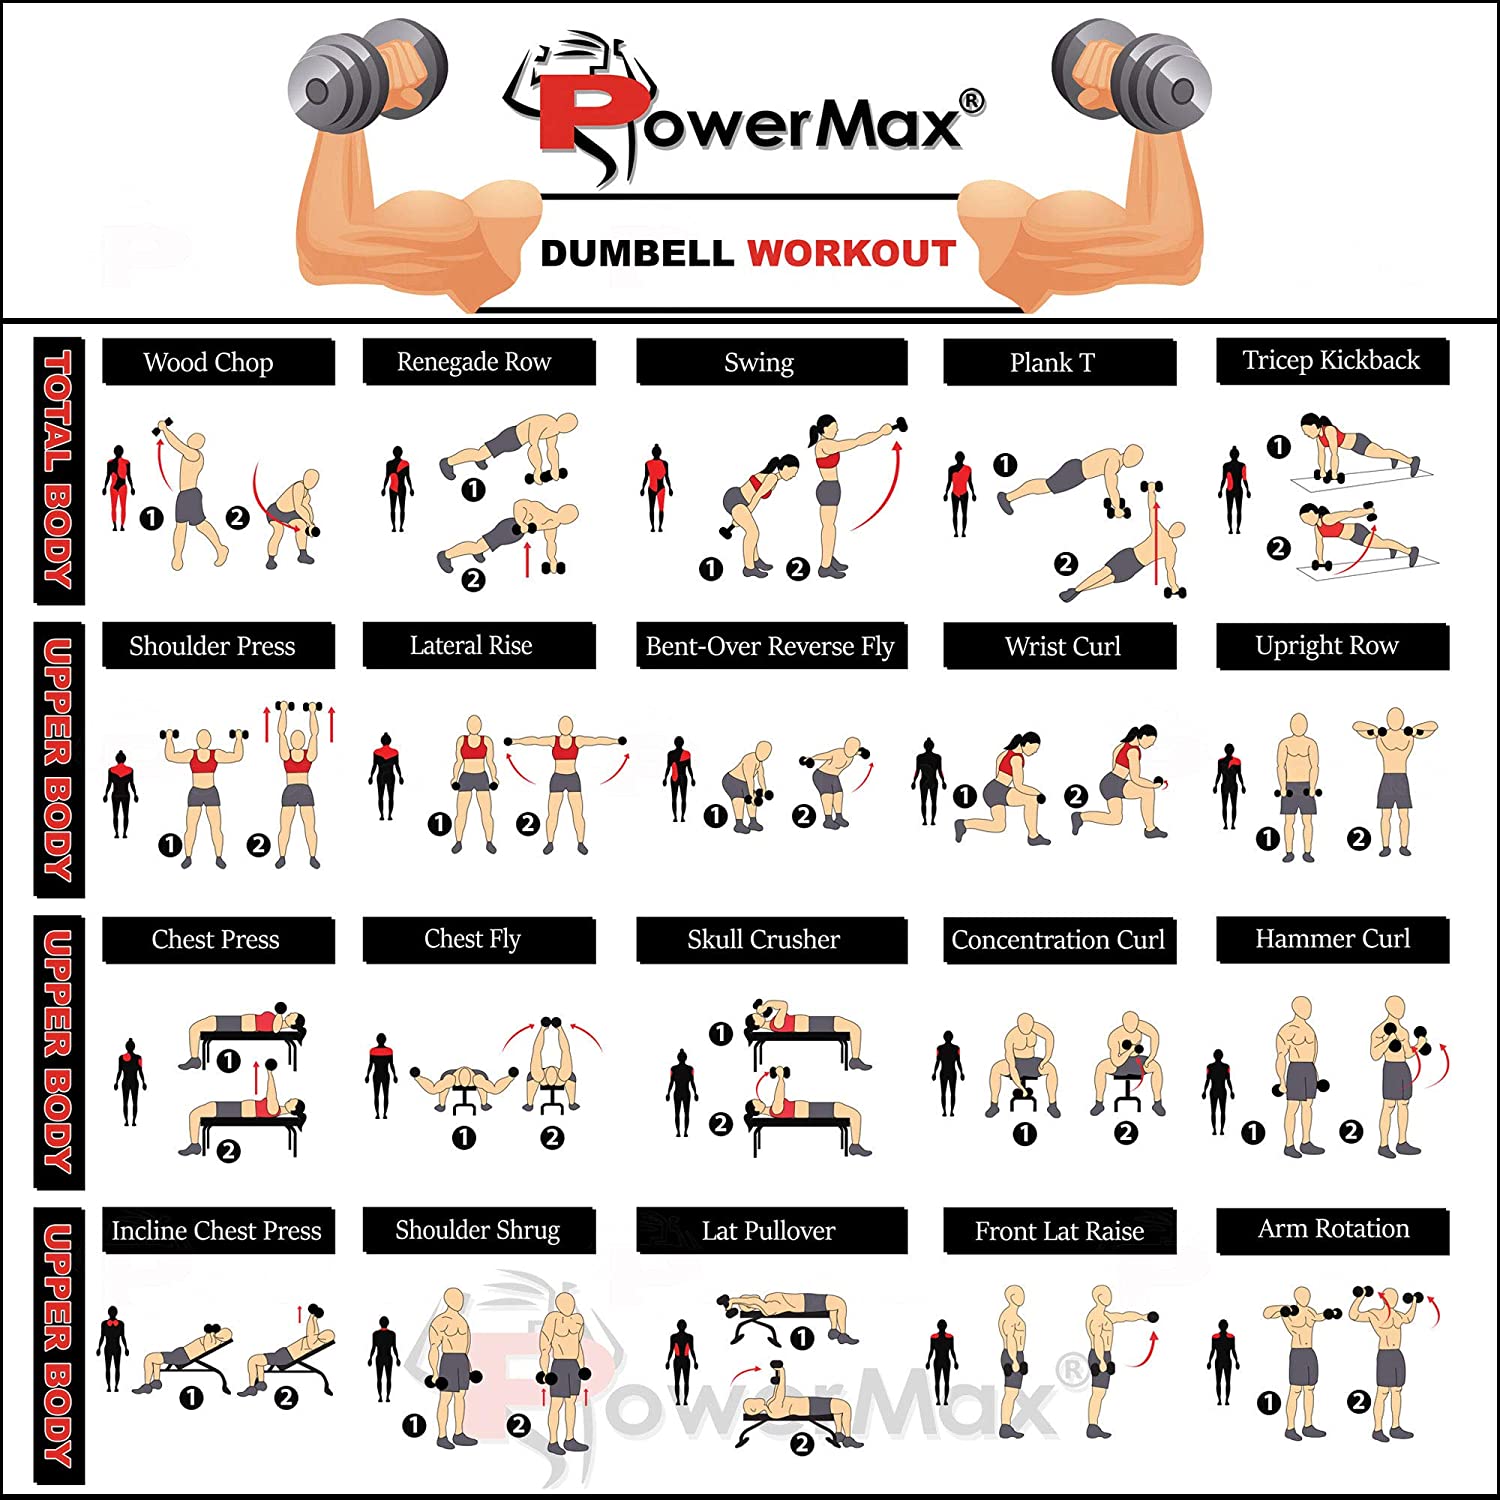 PowerMax Fitness PDS-10KG Dumbbell Set with Non-Slip Grip for Home Use